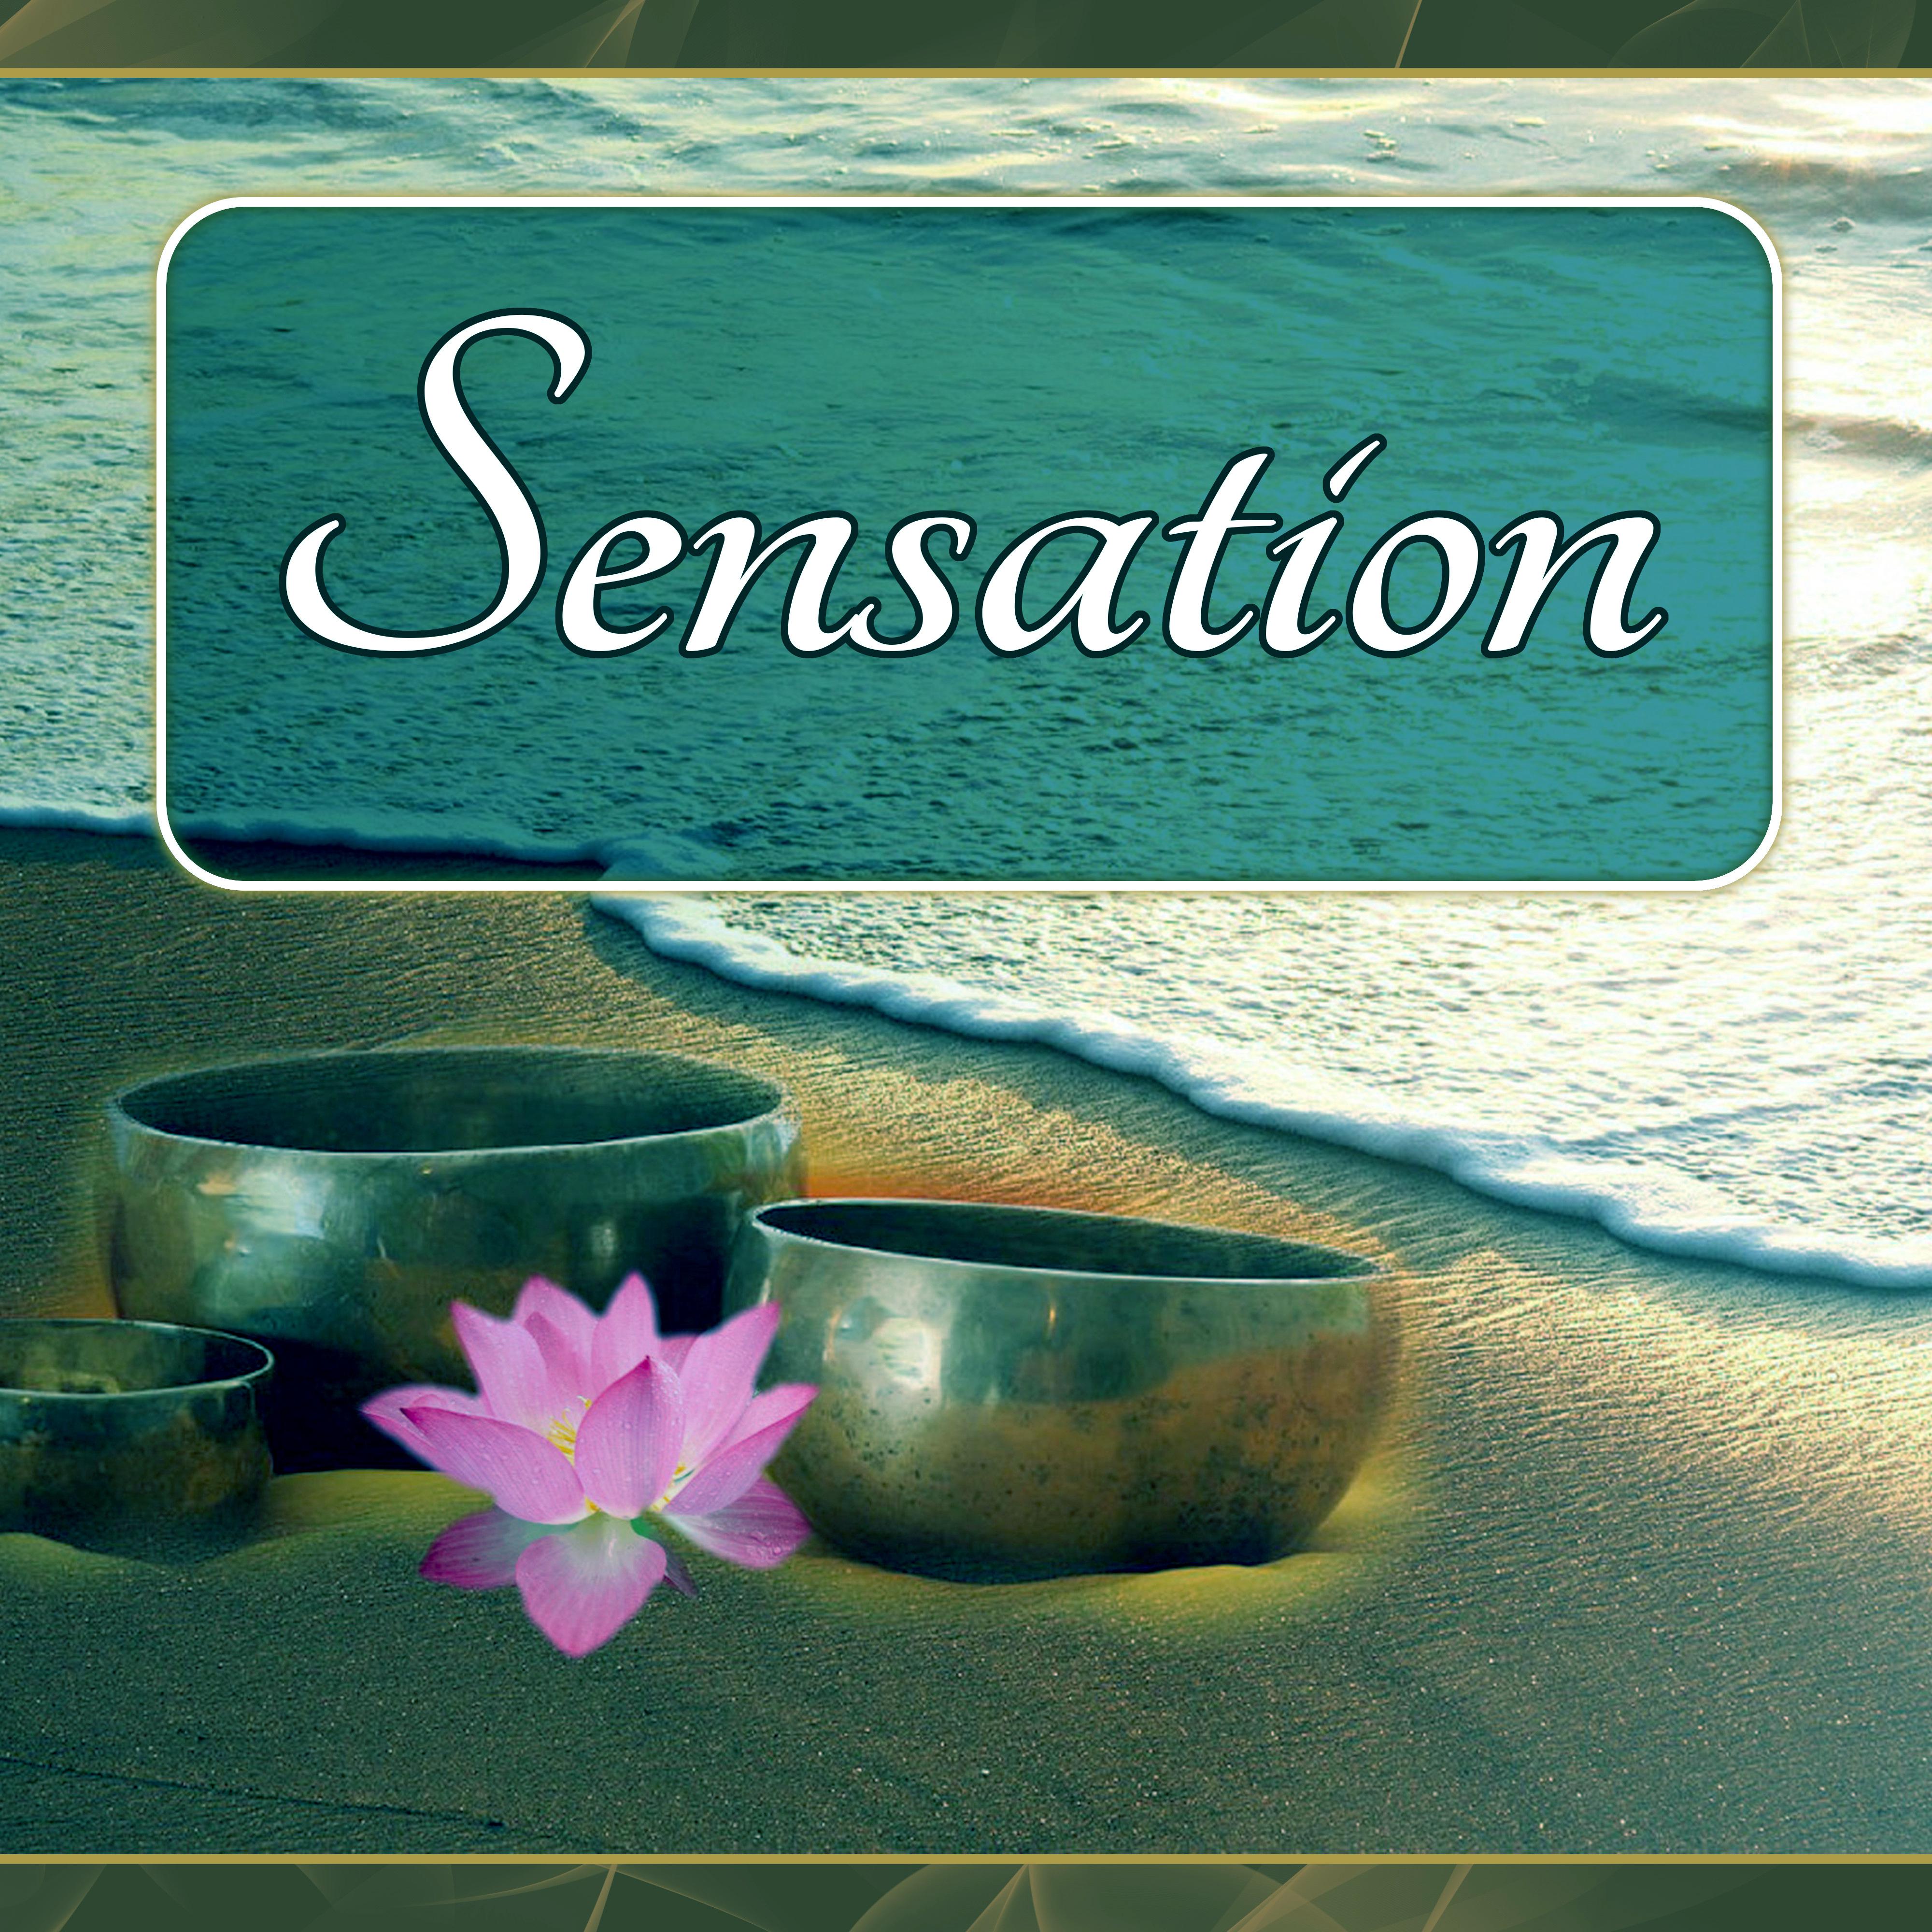 Sensation  Wellness Music Spa, Pure Mind and Body with Healing Massage Music, Harmony of Senses, Therapy Music for Relax, Inner Peace